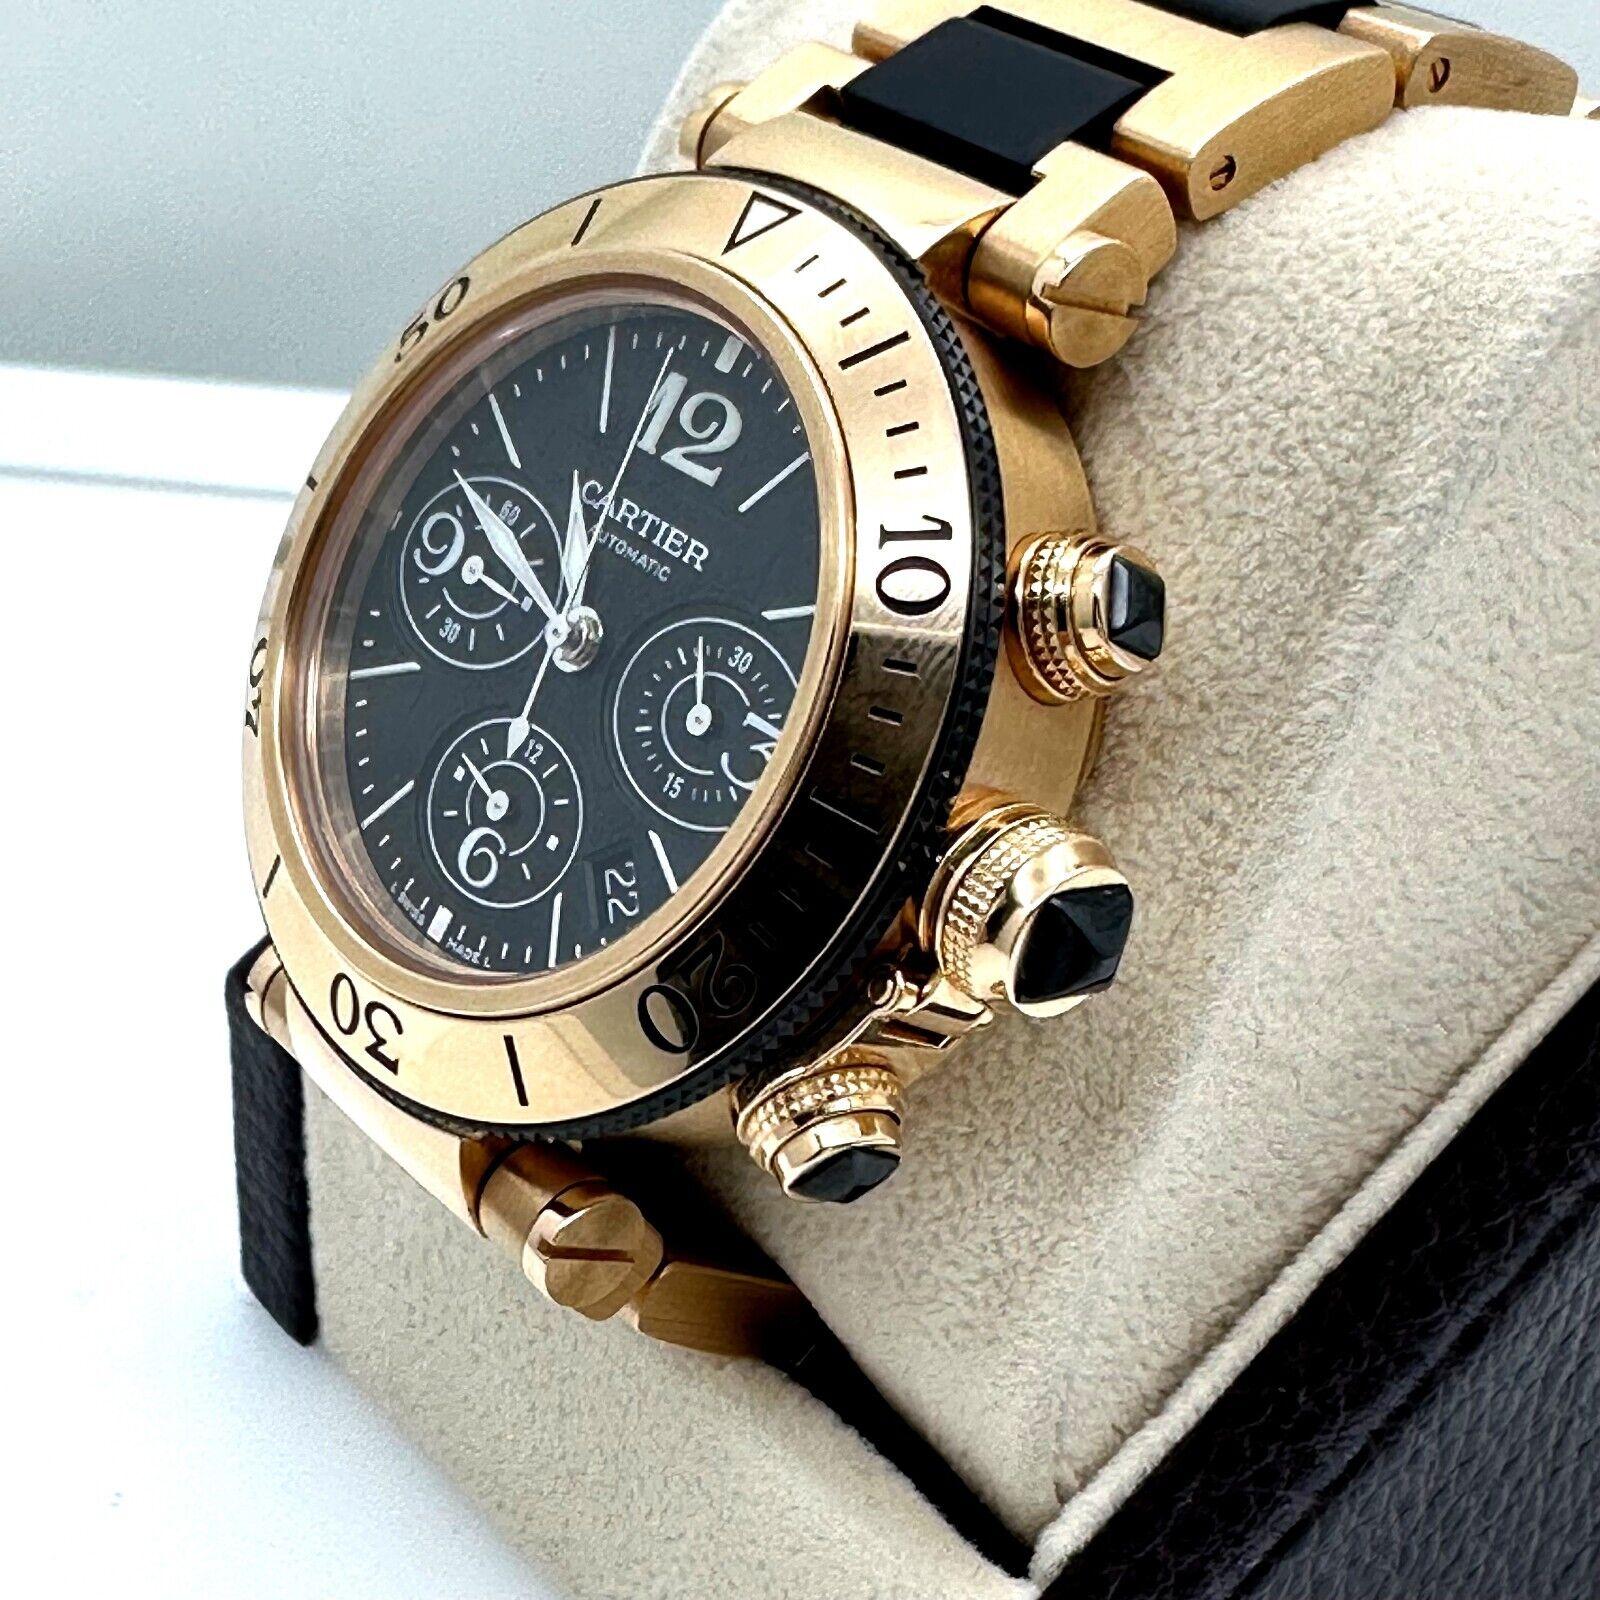 Style Number: 3066

Year: 2019

Model: Pasha Seatimer Chronograph

Case Material: 18K Rose Gold

Band: 18K Rose Gold & Ceramic

Bezel:  18K Rose Gold

Dial: Black

Face: Sapphire Crystal

Case Size: 42mm 

Includes: 

-Cartier Box &